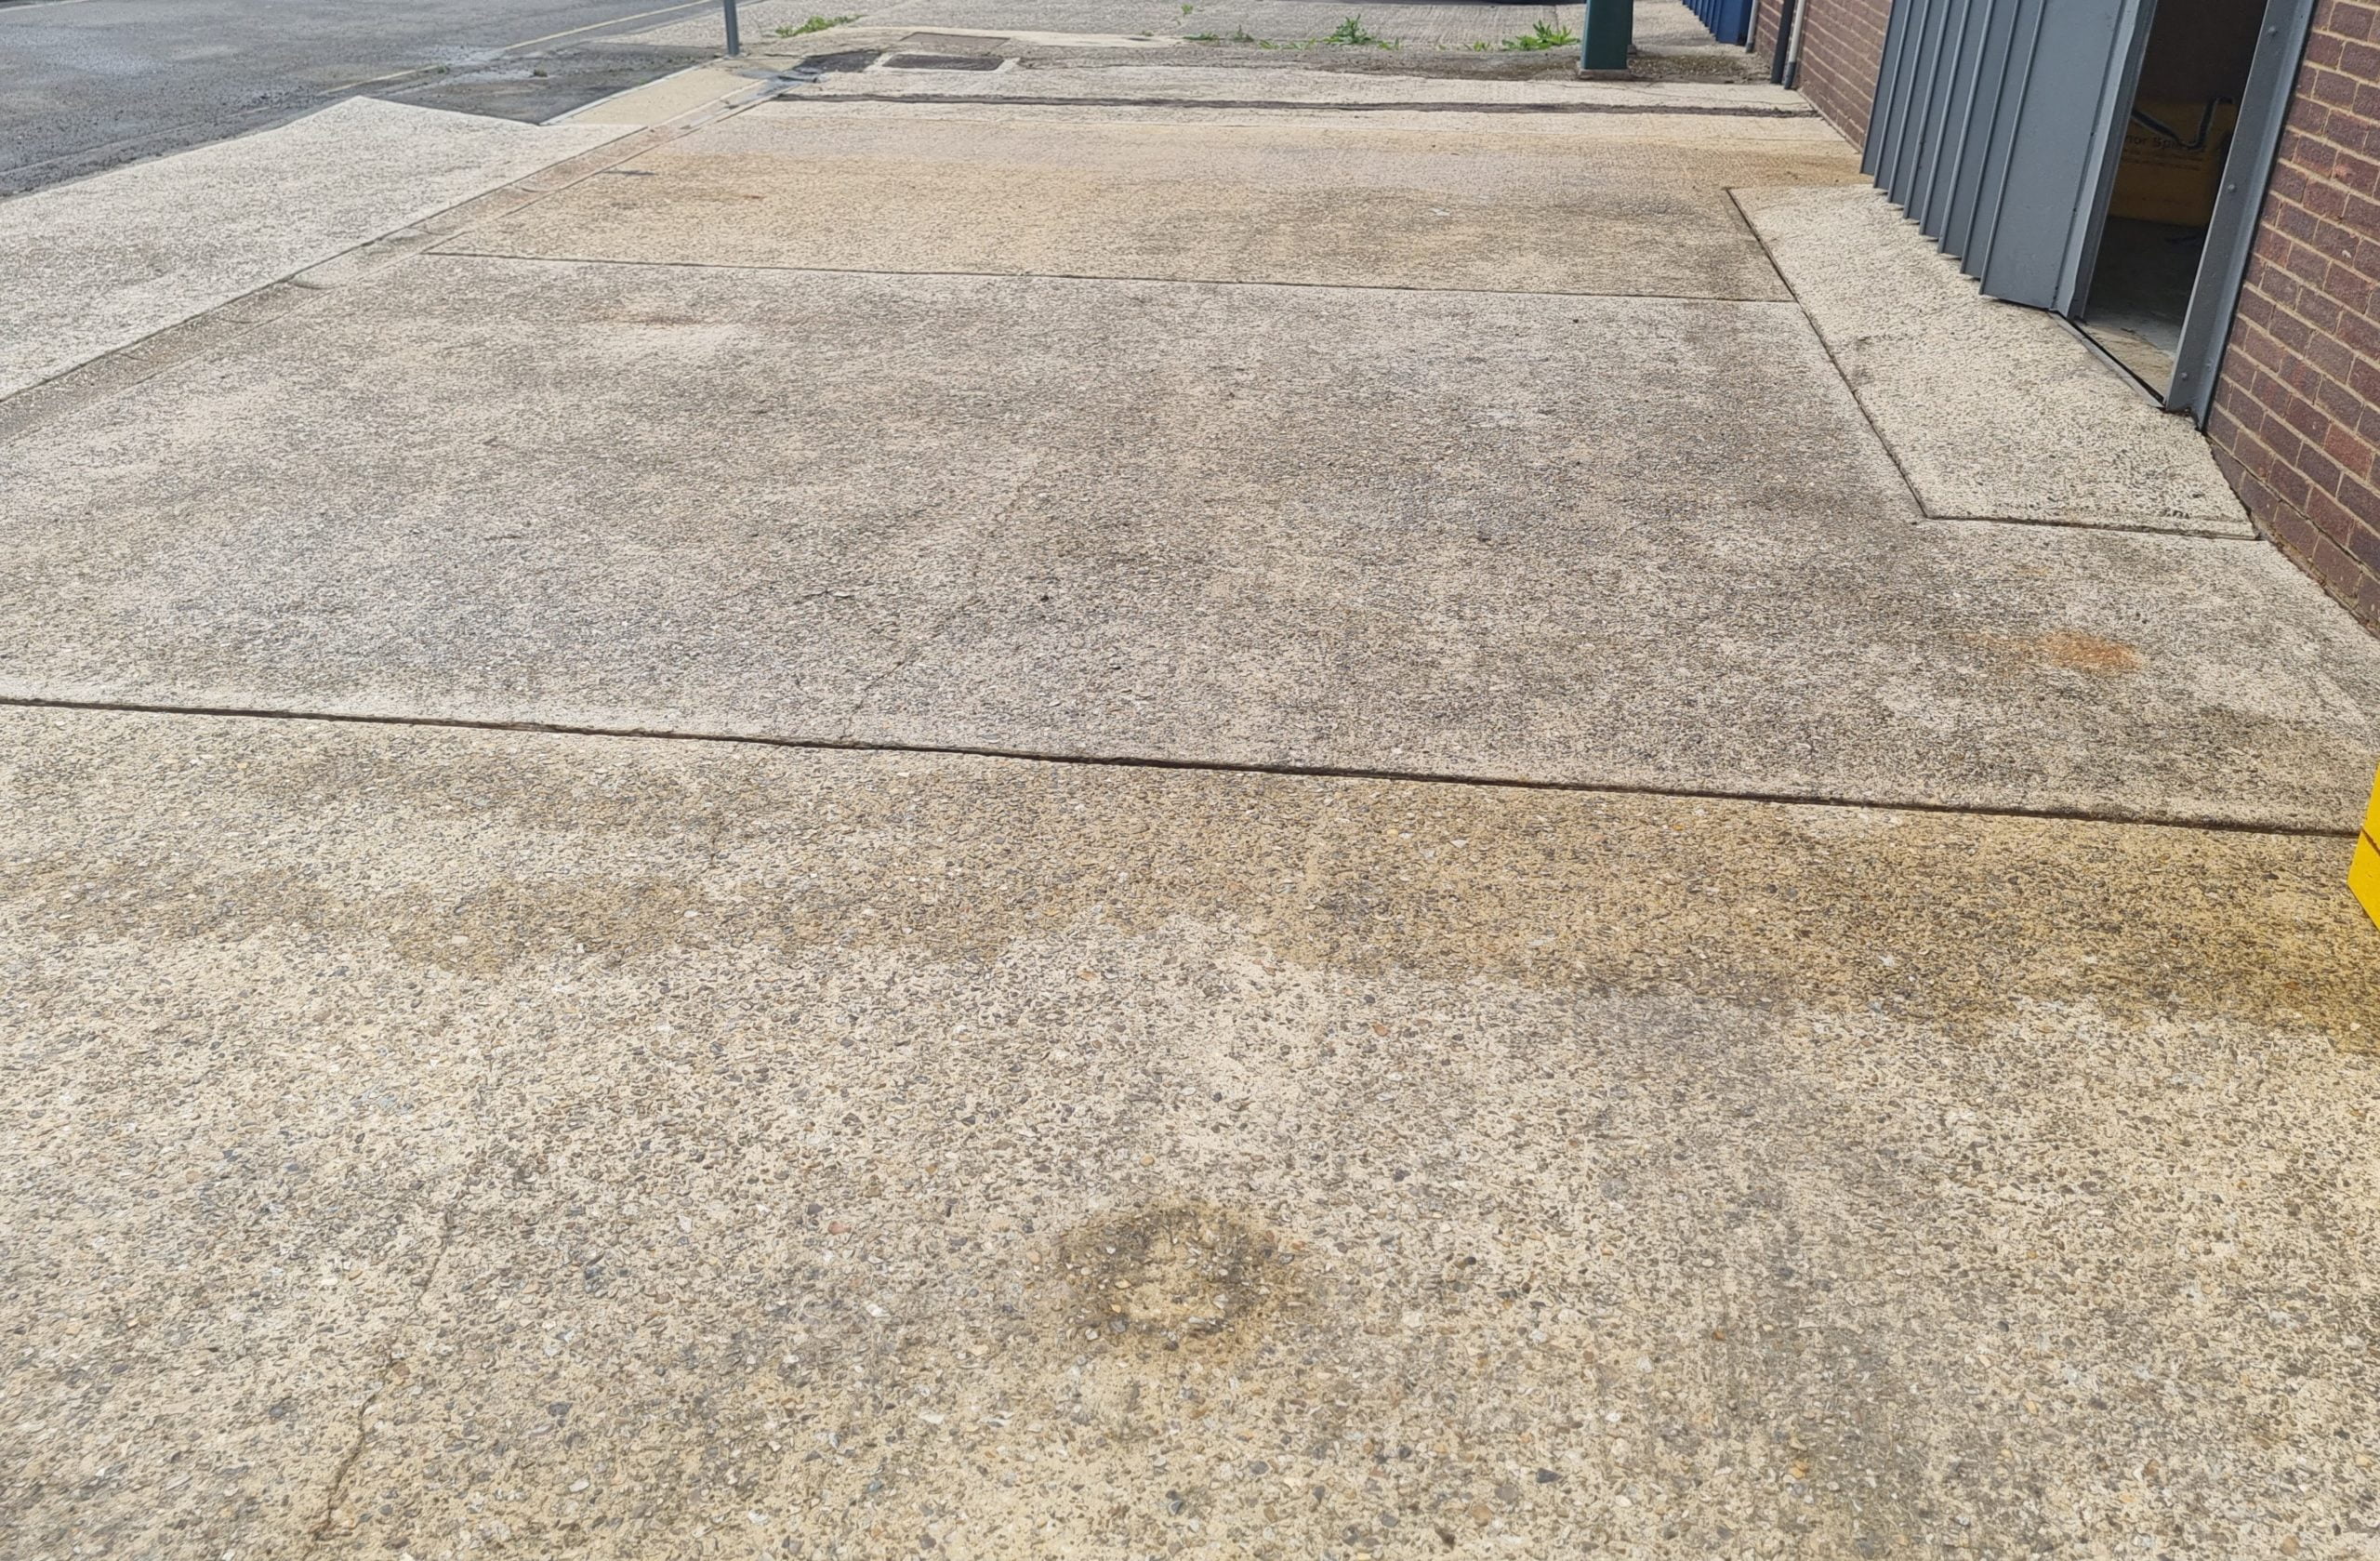 After driveway cleaning – RJS Waste Management's main parking forecourt